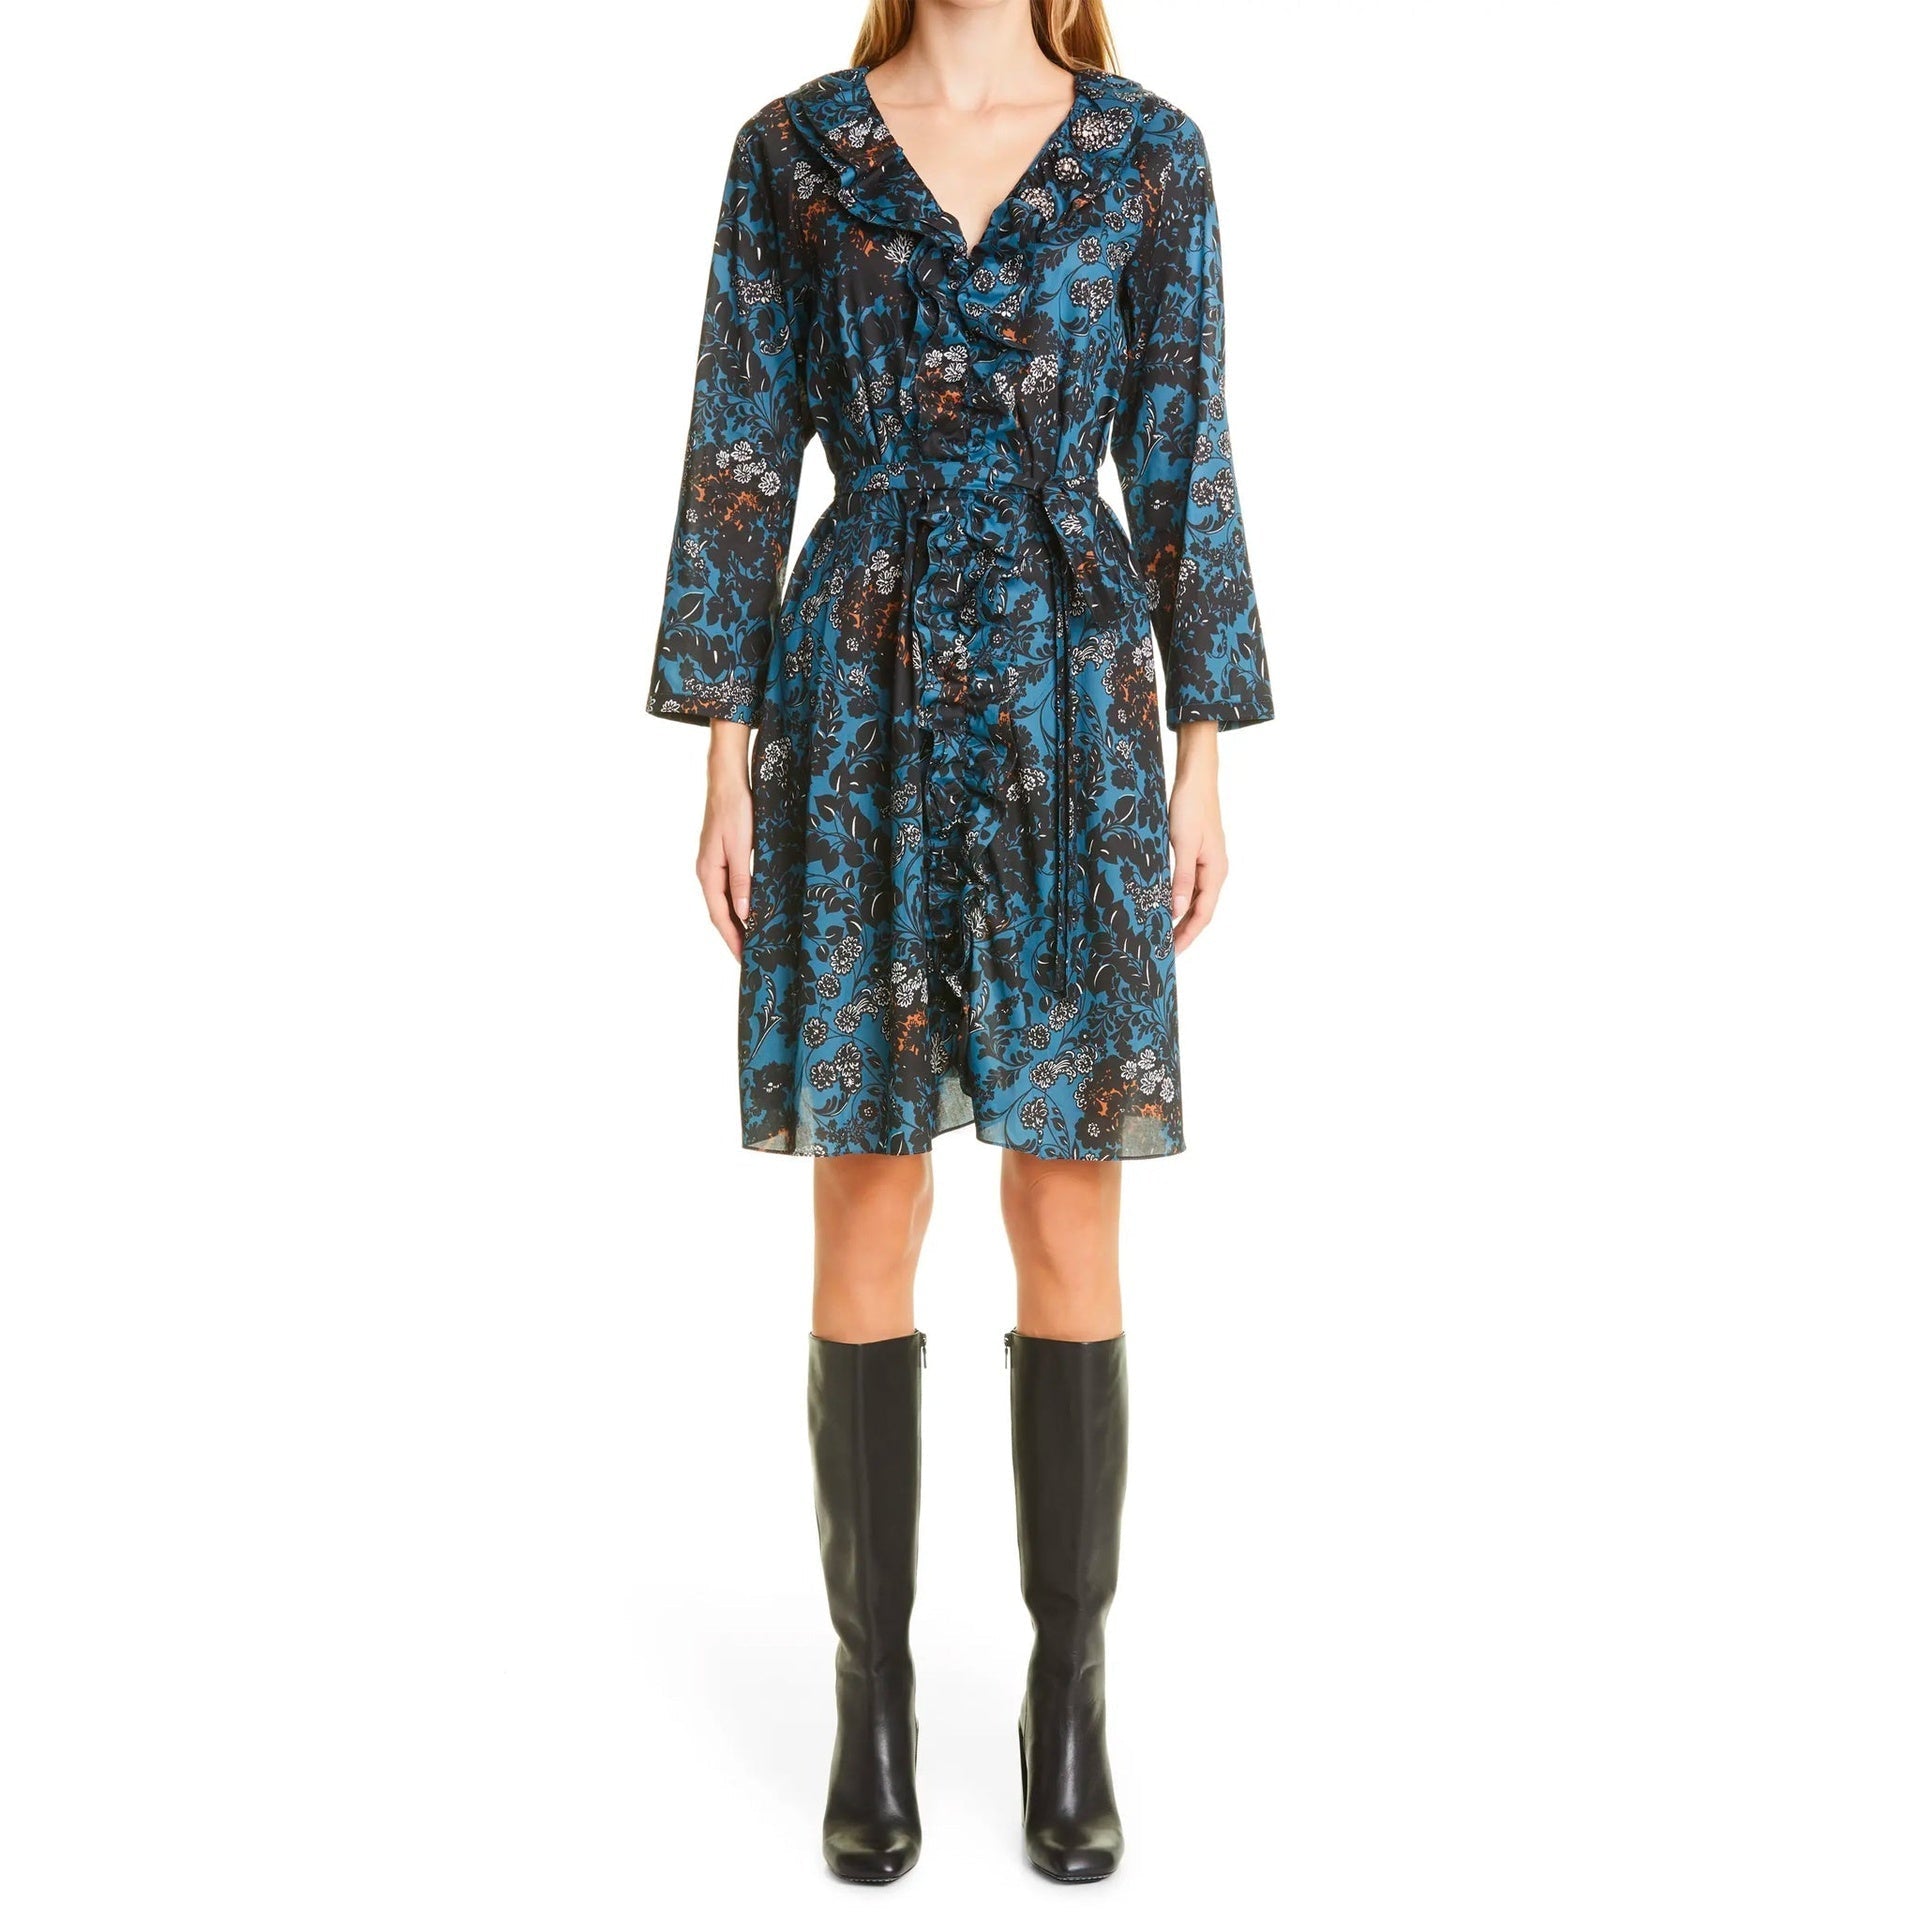 S-MAX-MARA-OUTLET-SALE-s-Max-Mara-Fiorito-Floral-Dress-Kleider-Rocke-ARCHIVE-COLLECTION-2.jpg